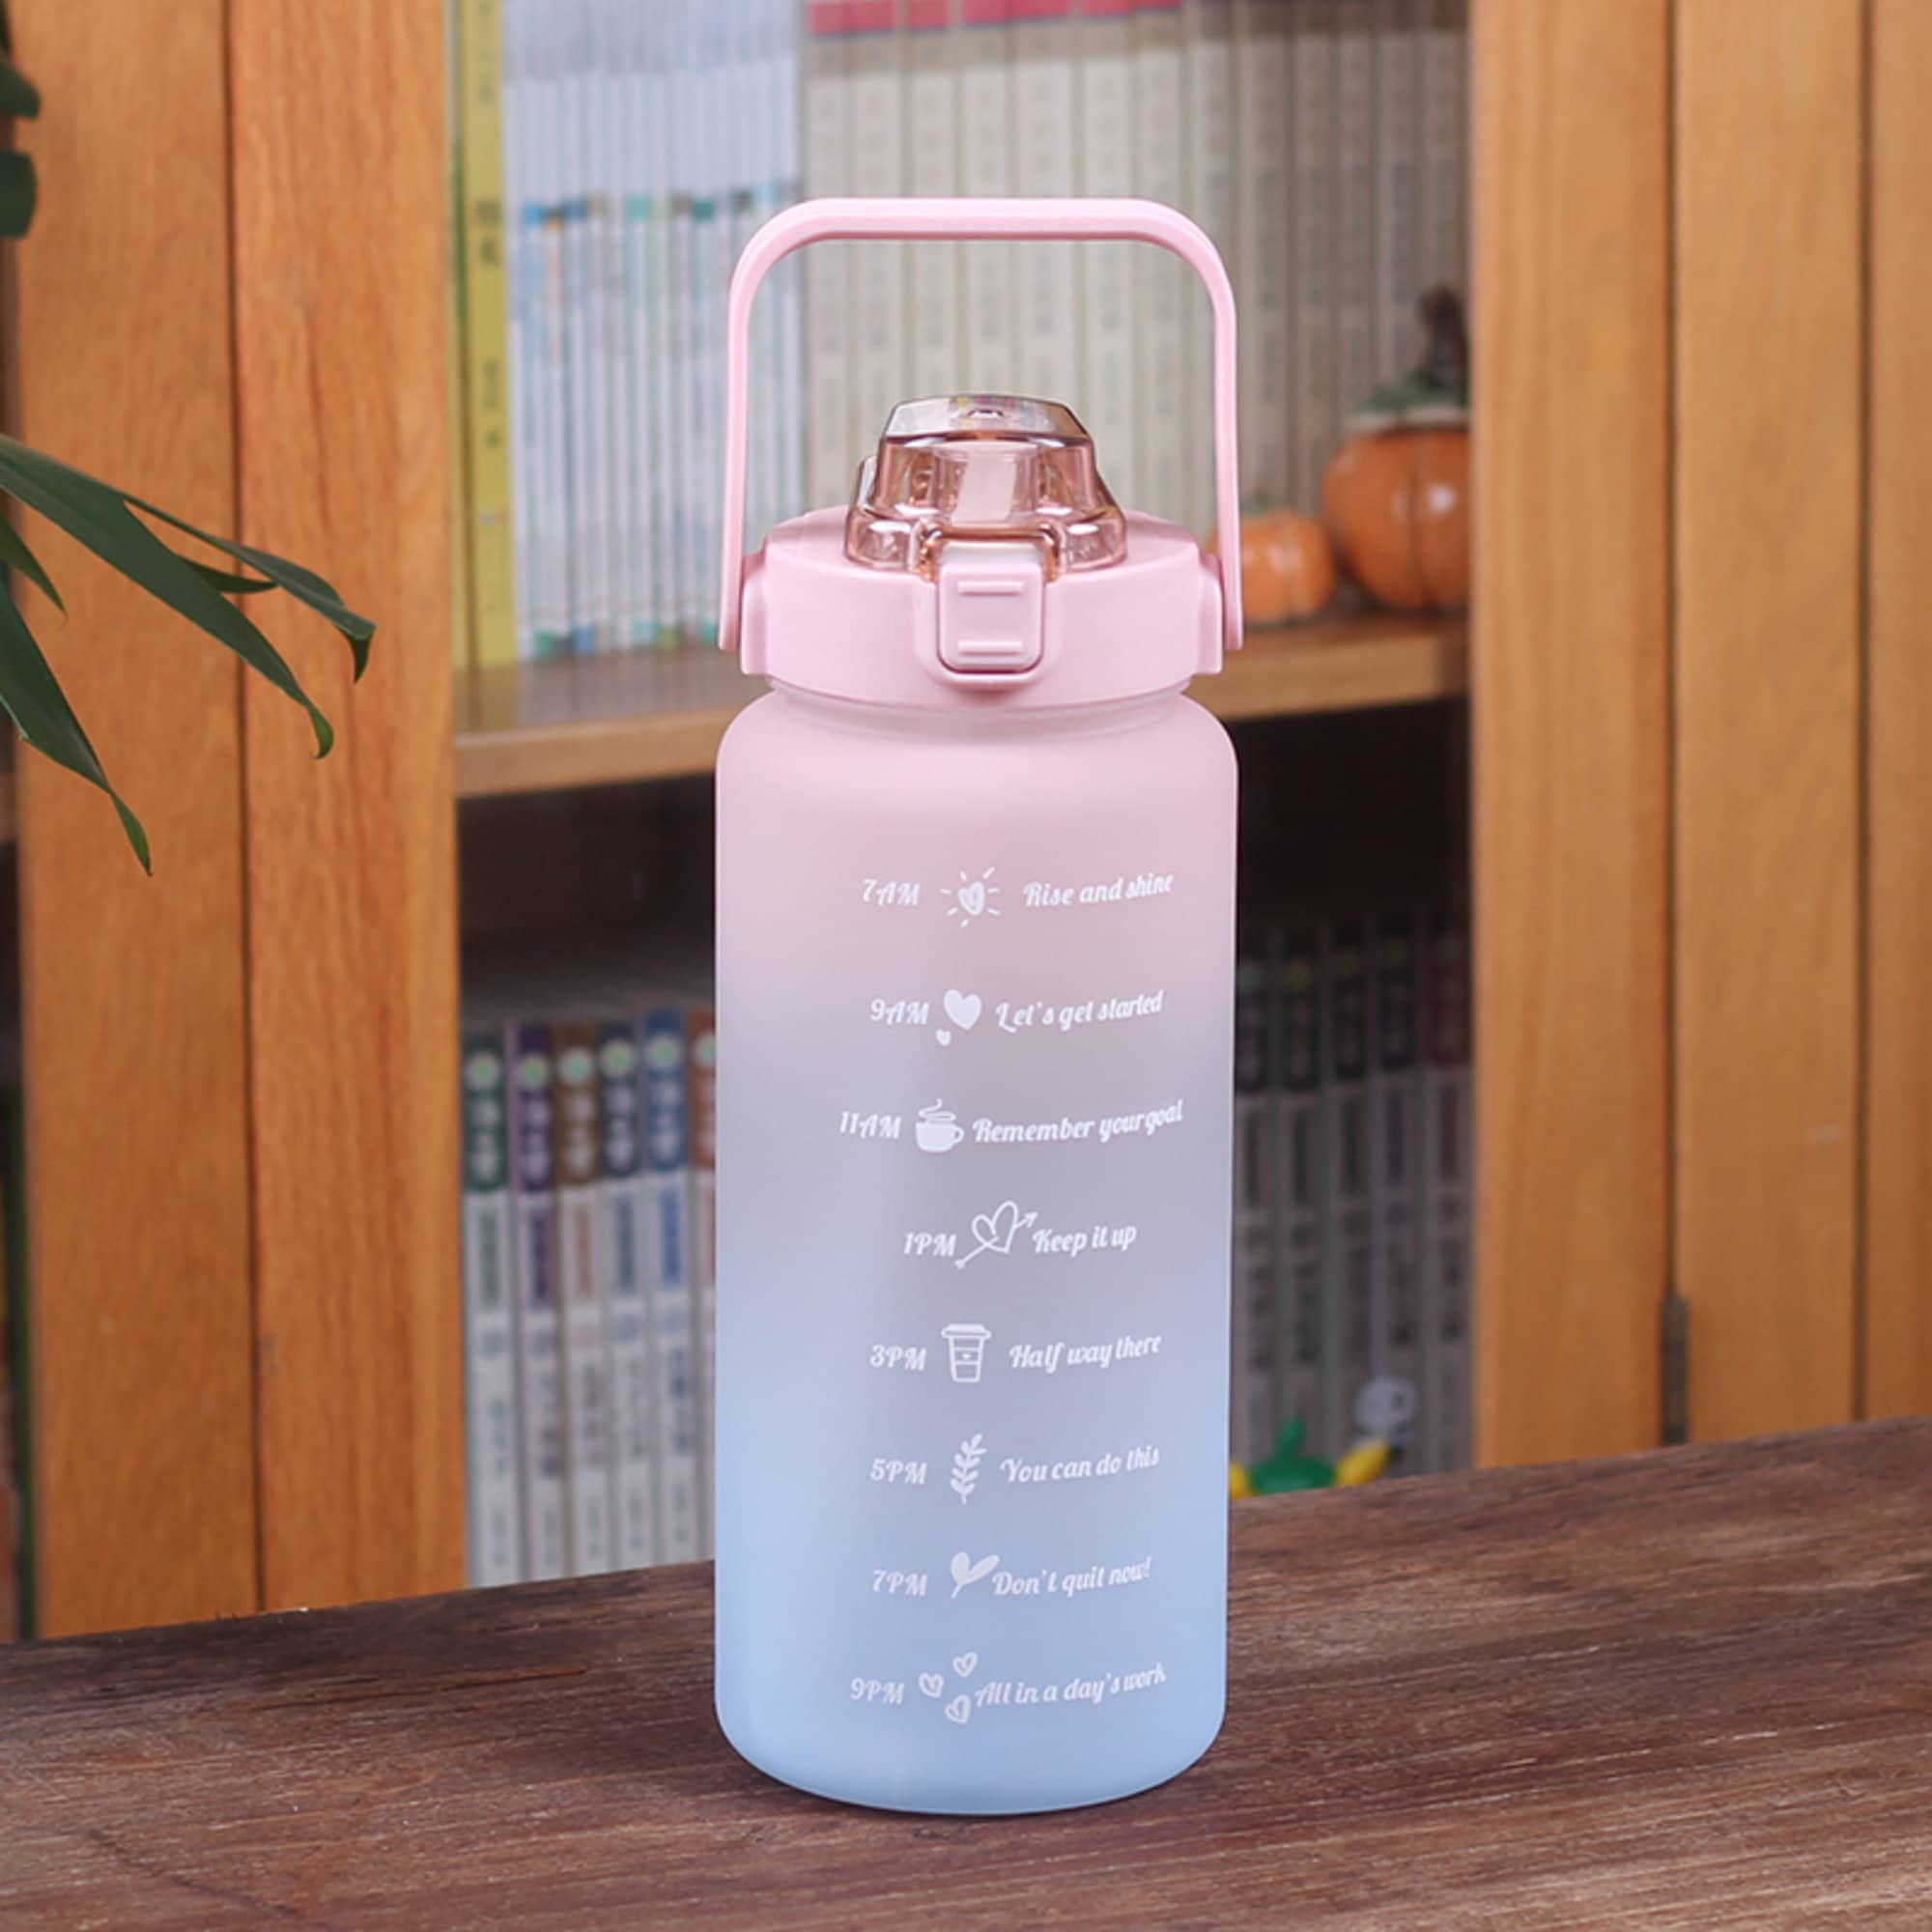 Water Bottles with Time Maker, BPA-Free Plastic Water for Men Women, No  Straw Leak-Proof Sturdy Drinking Bottles with Handle - China Water Bottle  price